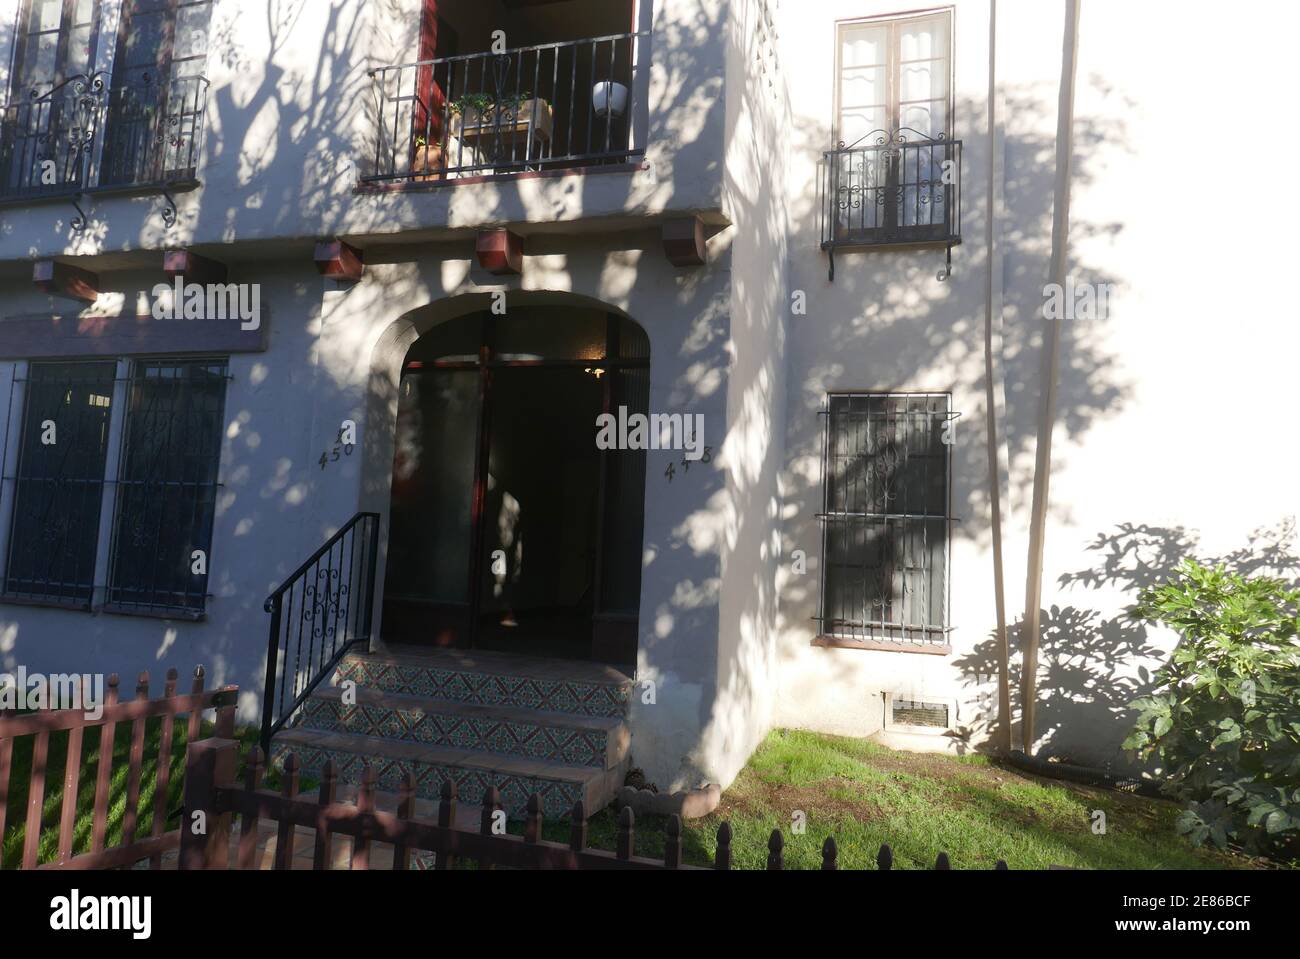 Los Angeles, California, USA 30th January 2021 A general view of atmosphere of Musician/singer Kurt Cobain of Nirvana and singer Courtney Love of Hole former Apartment in 1991/1992 at 448 N. Spaulding Avenue in Los Angeles, California, USA. They lived here when Courtney was pregnant with Frances Bean Cobain. Photo by Barry King/Alamy Stock Photo Stock Photo